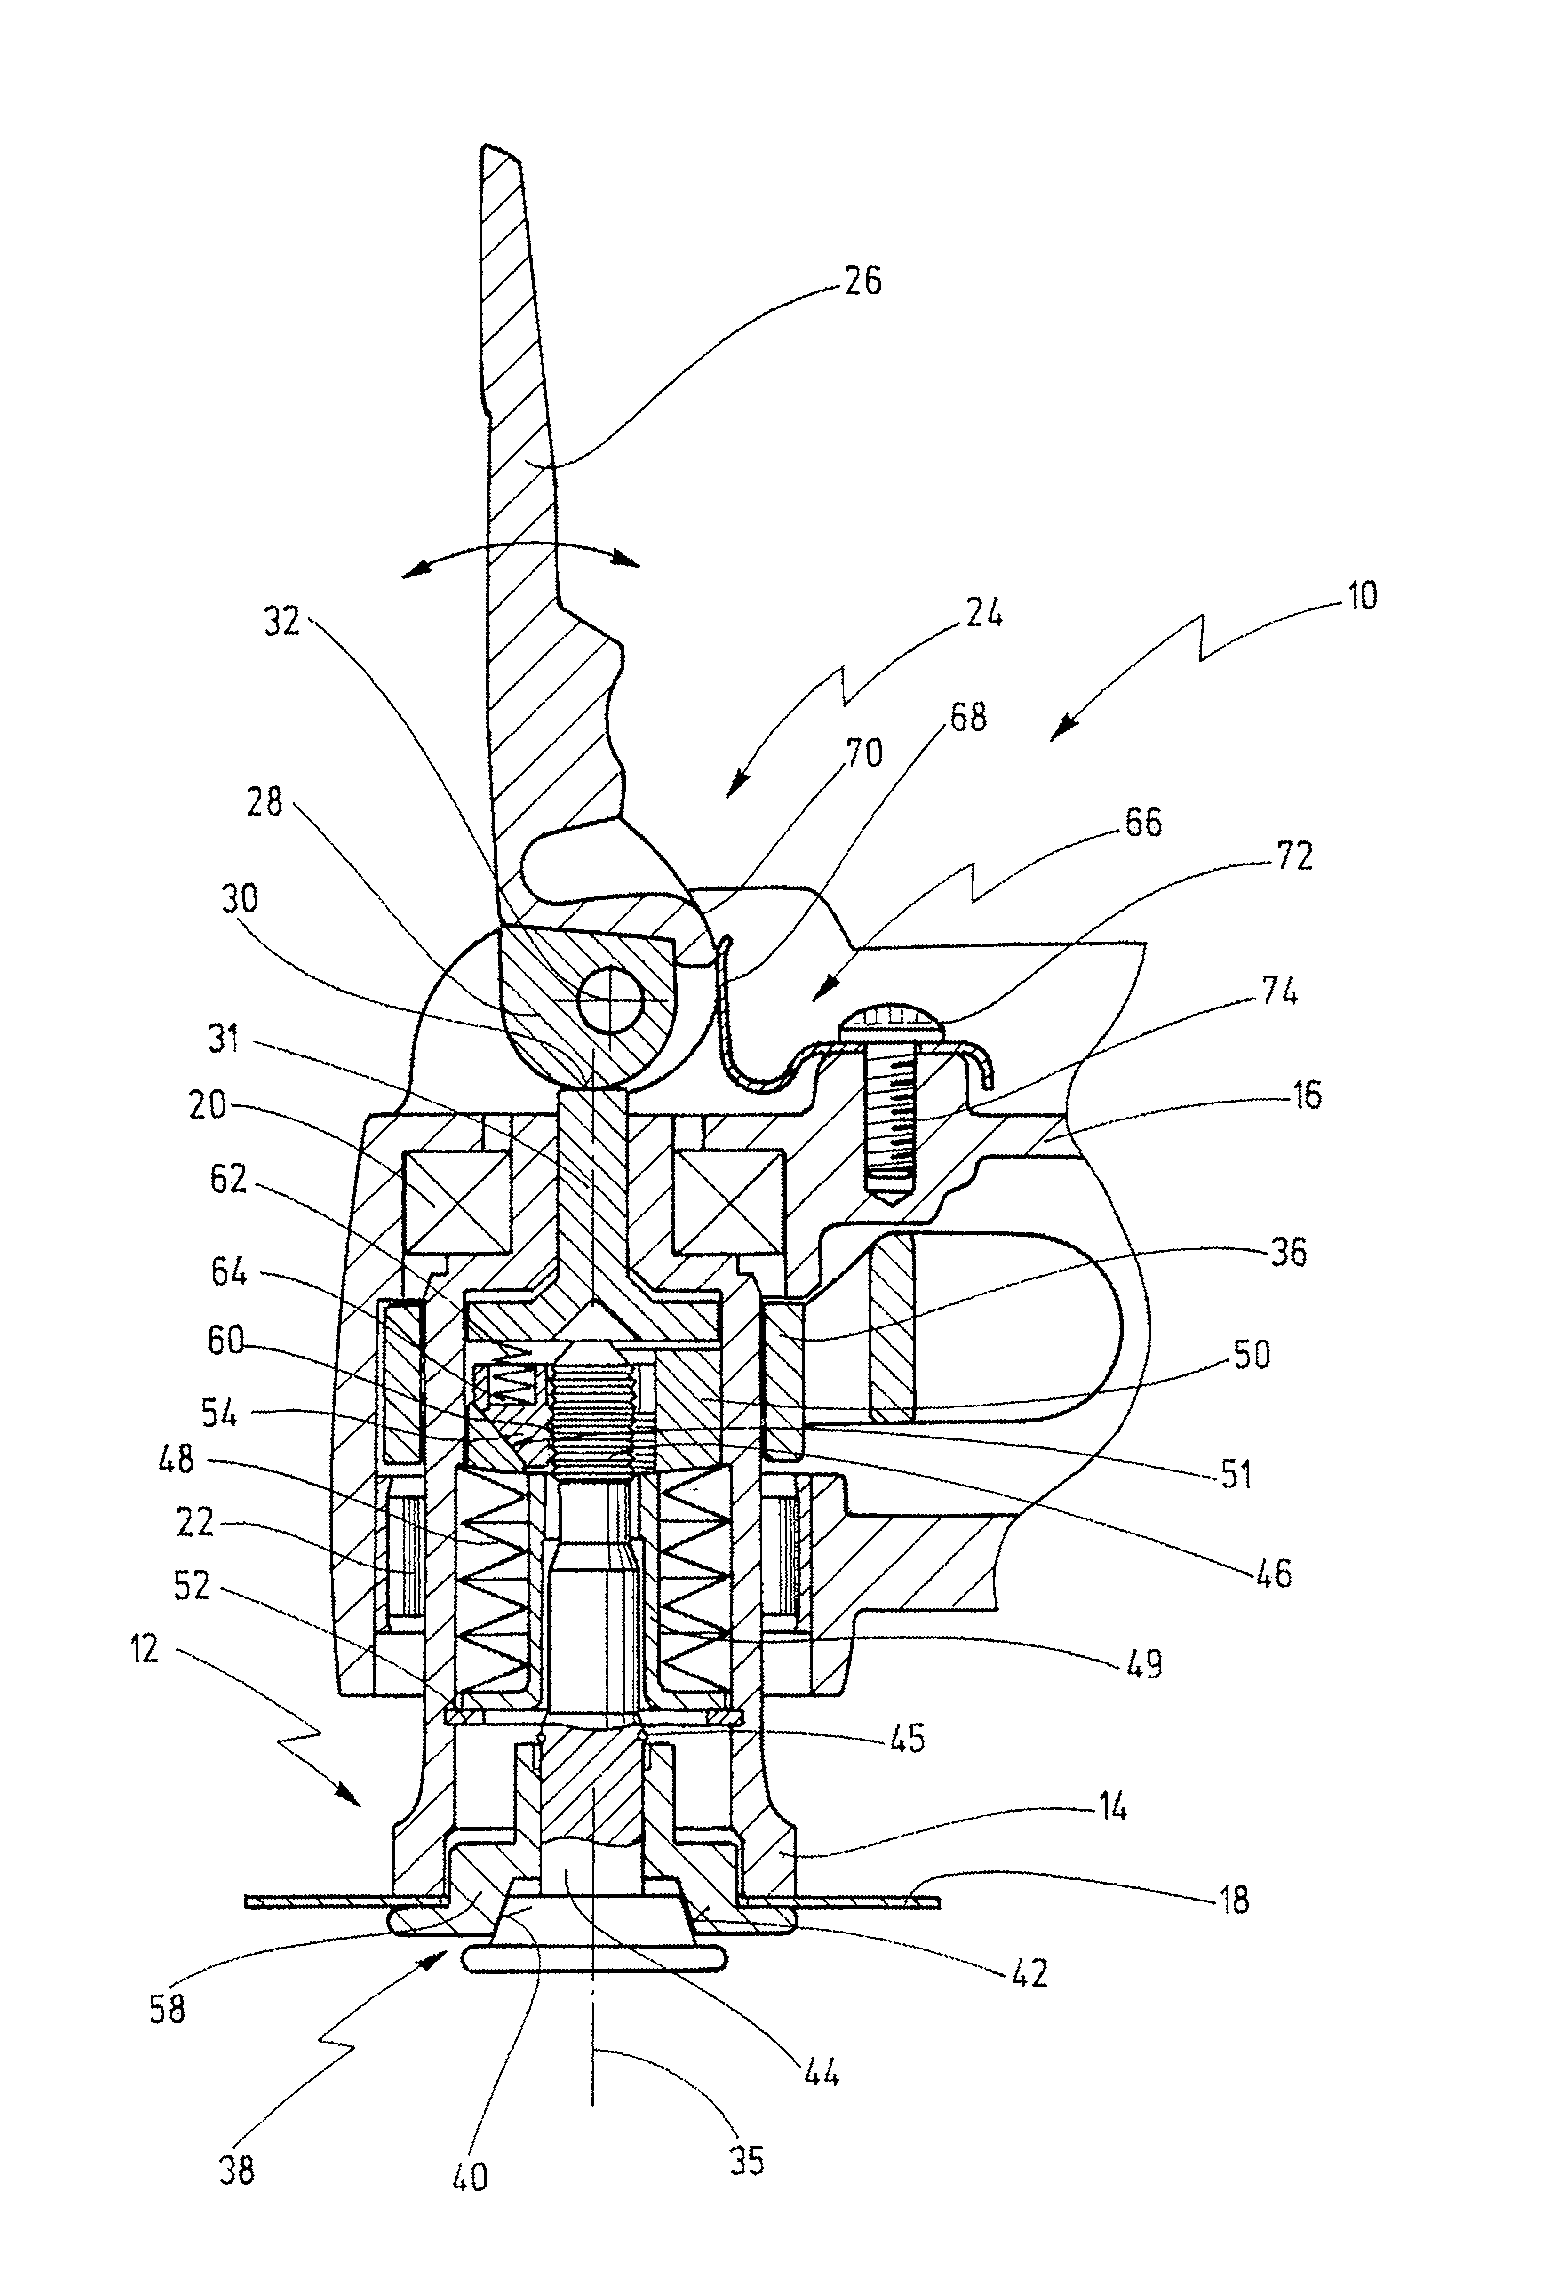 Power-Driven Hand Tool With Clamping Fixture For A Tool